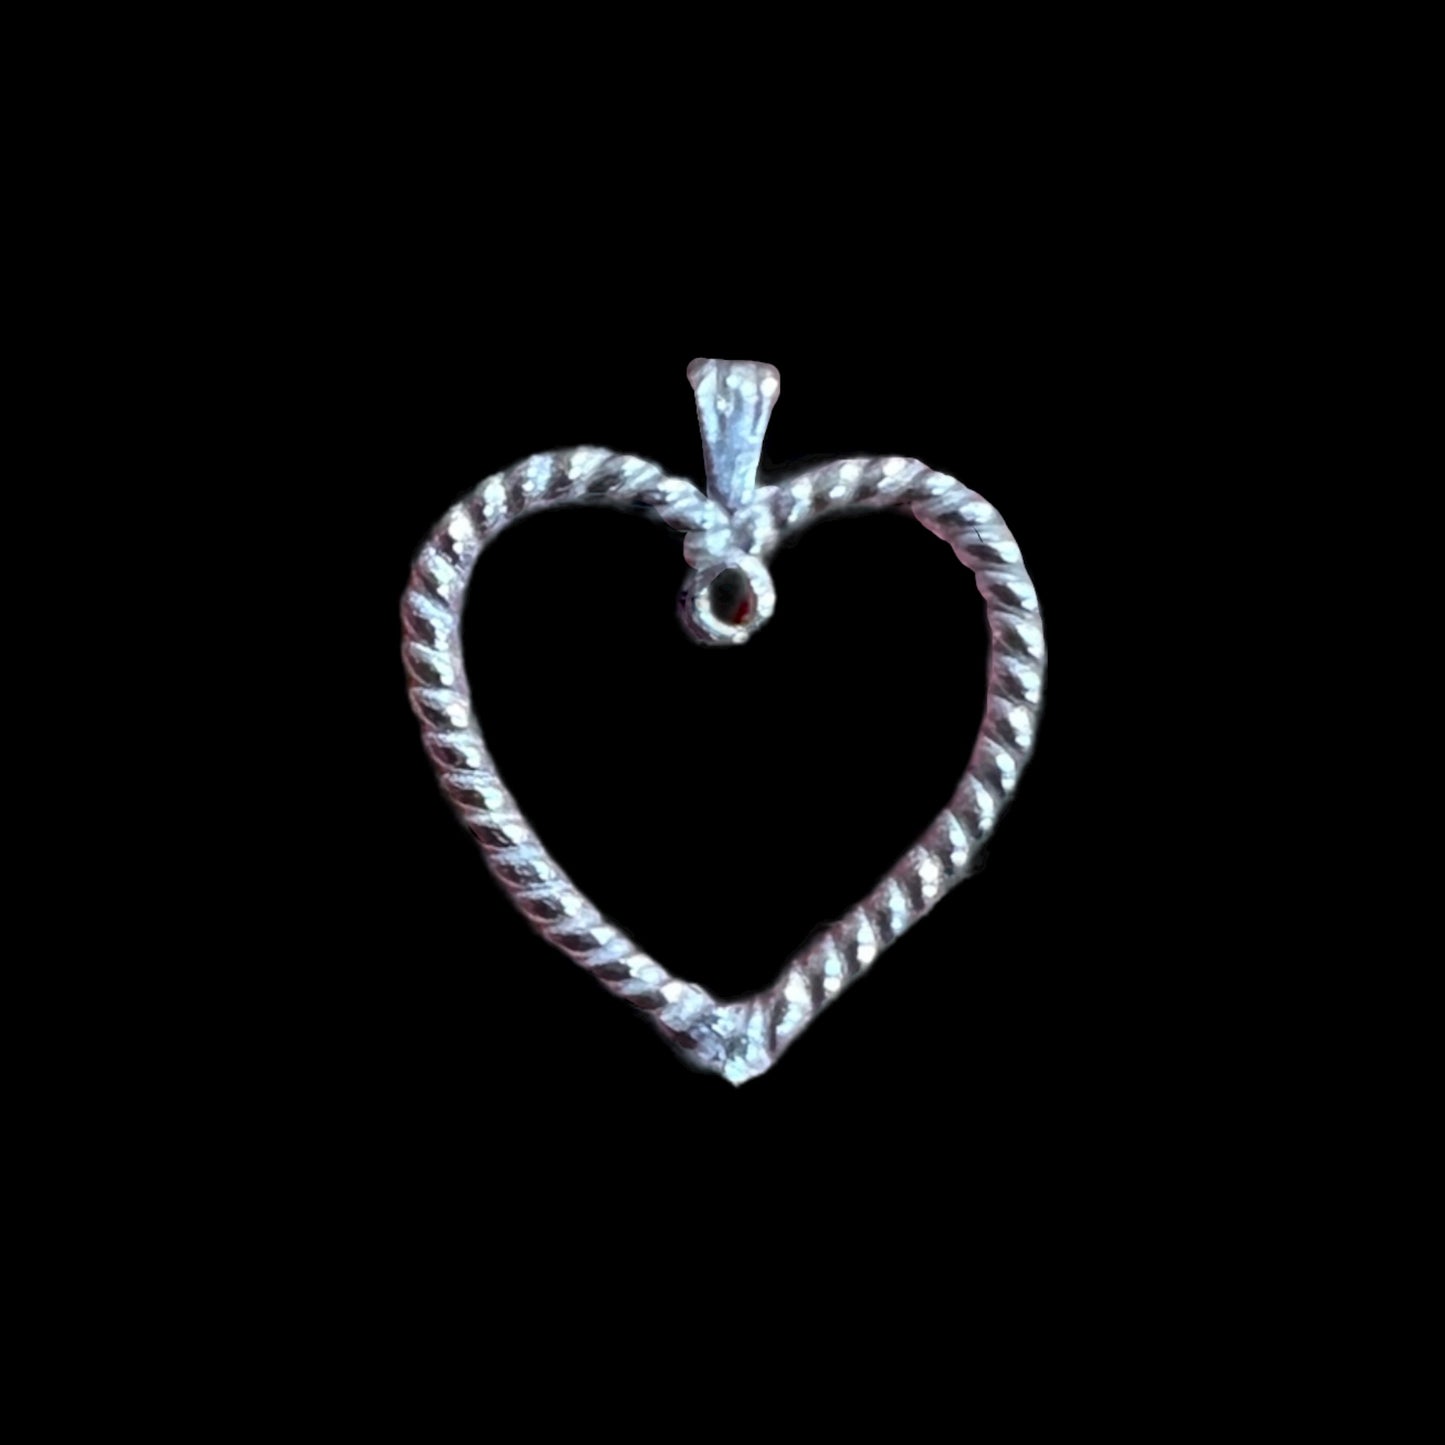 Heart Rope finish with drop and bail